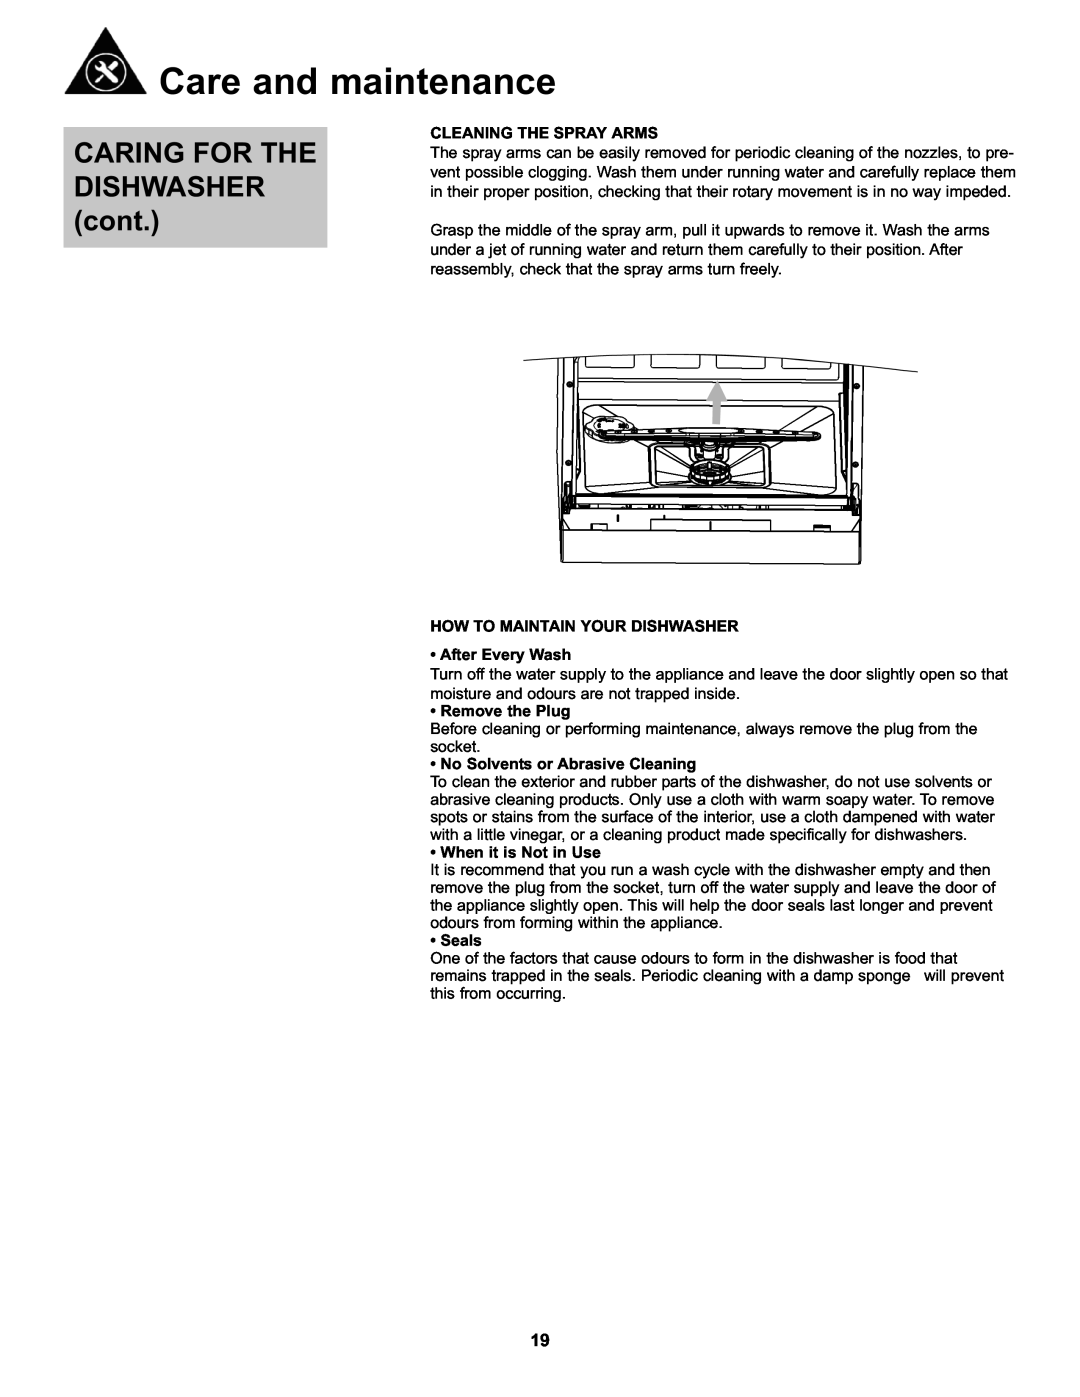 Danby DDW611WLED CARING FOR THE DISHWASHER cont, Care and maintenance, Cleaning The Spray Arms, Remove the Plug, Seals 